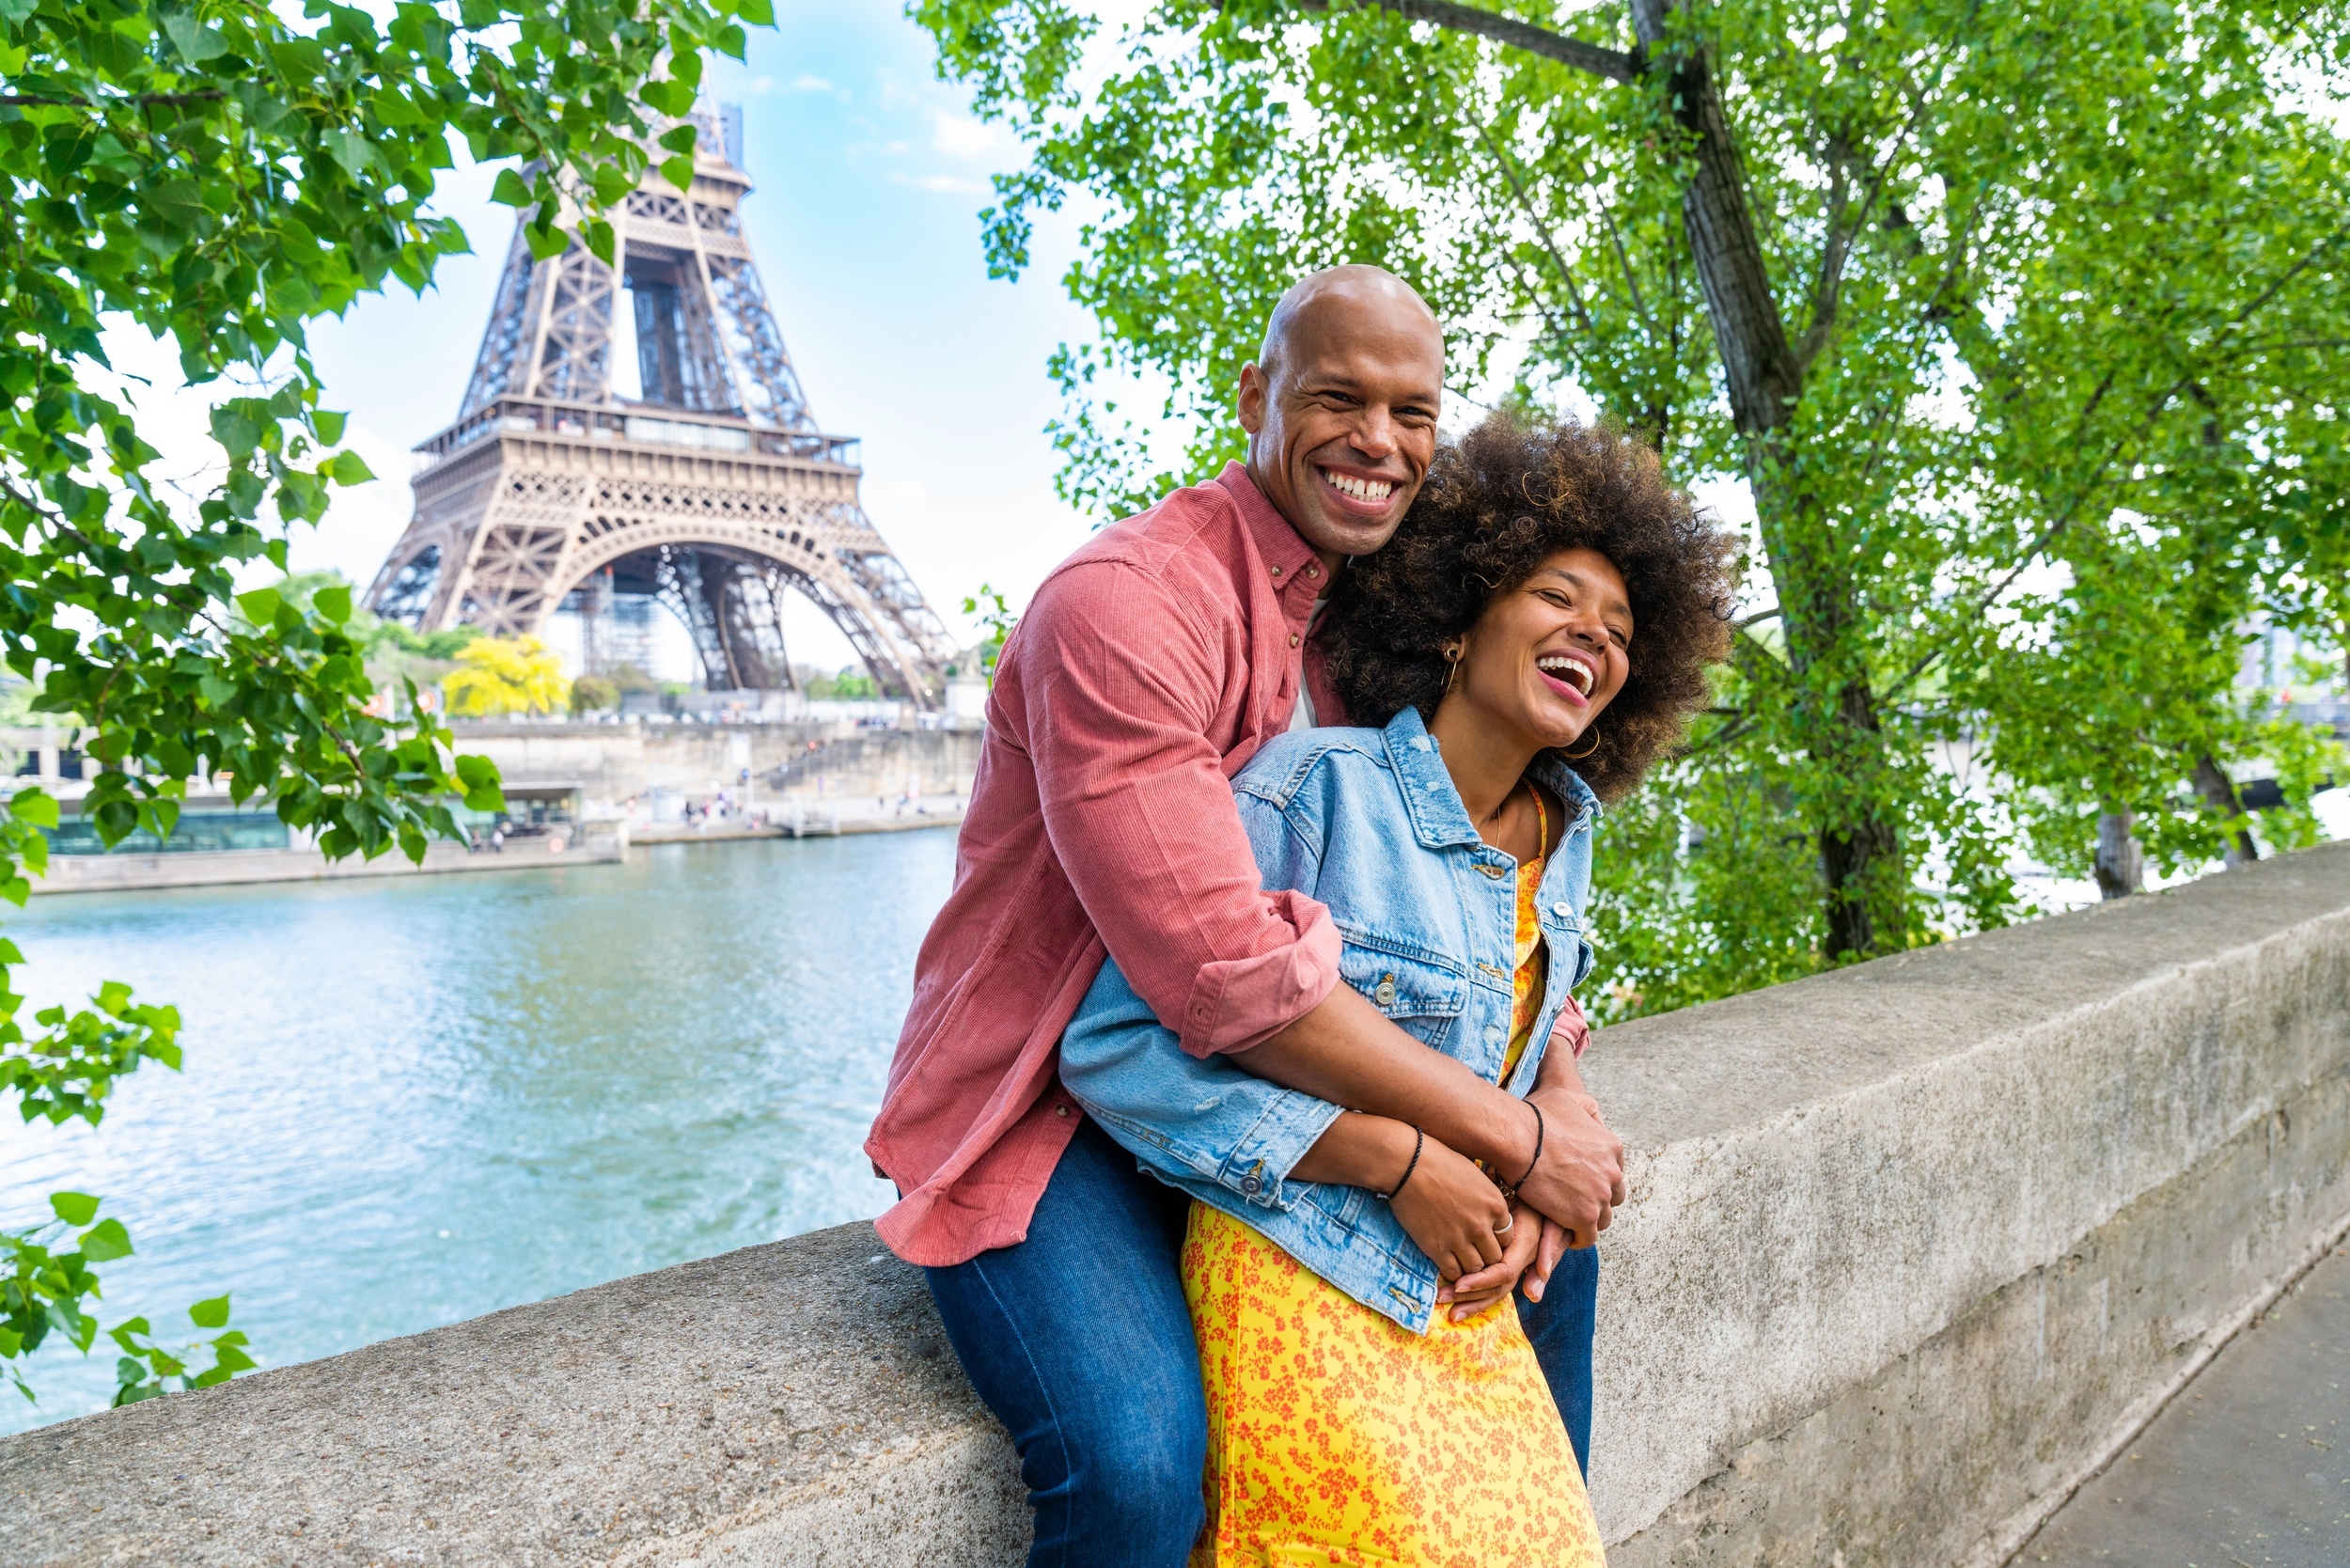 <p>The city most often associated with love, Paris is always a good idea for lovers. Stroll the storied streets, see landmarks lit up at night, and enjoy the chatter of the beautiful French language everywhere you go.</p><p>You may also like: <a href='https://www.yardbarker.com/lifestyle/articles/13_ben_jerrys_flavors_we_love_and_13_we_can_do_without_012324/s1__37671486'>13 Ben & Jerry’s flavors we love and 13 we can do without</a></p>